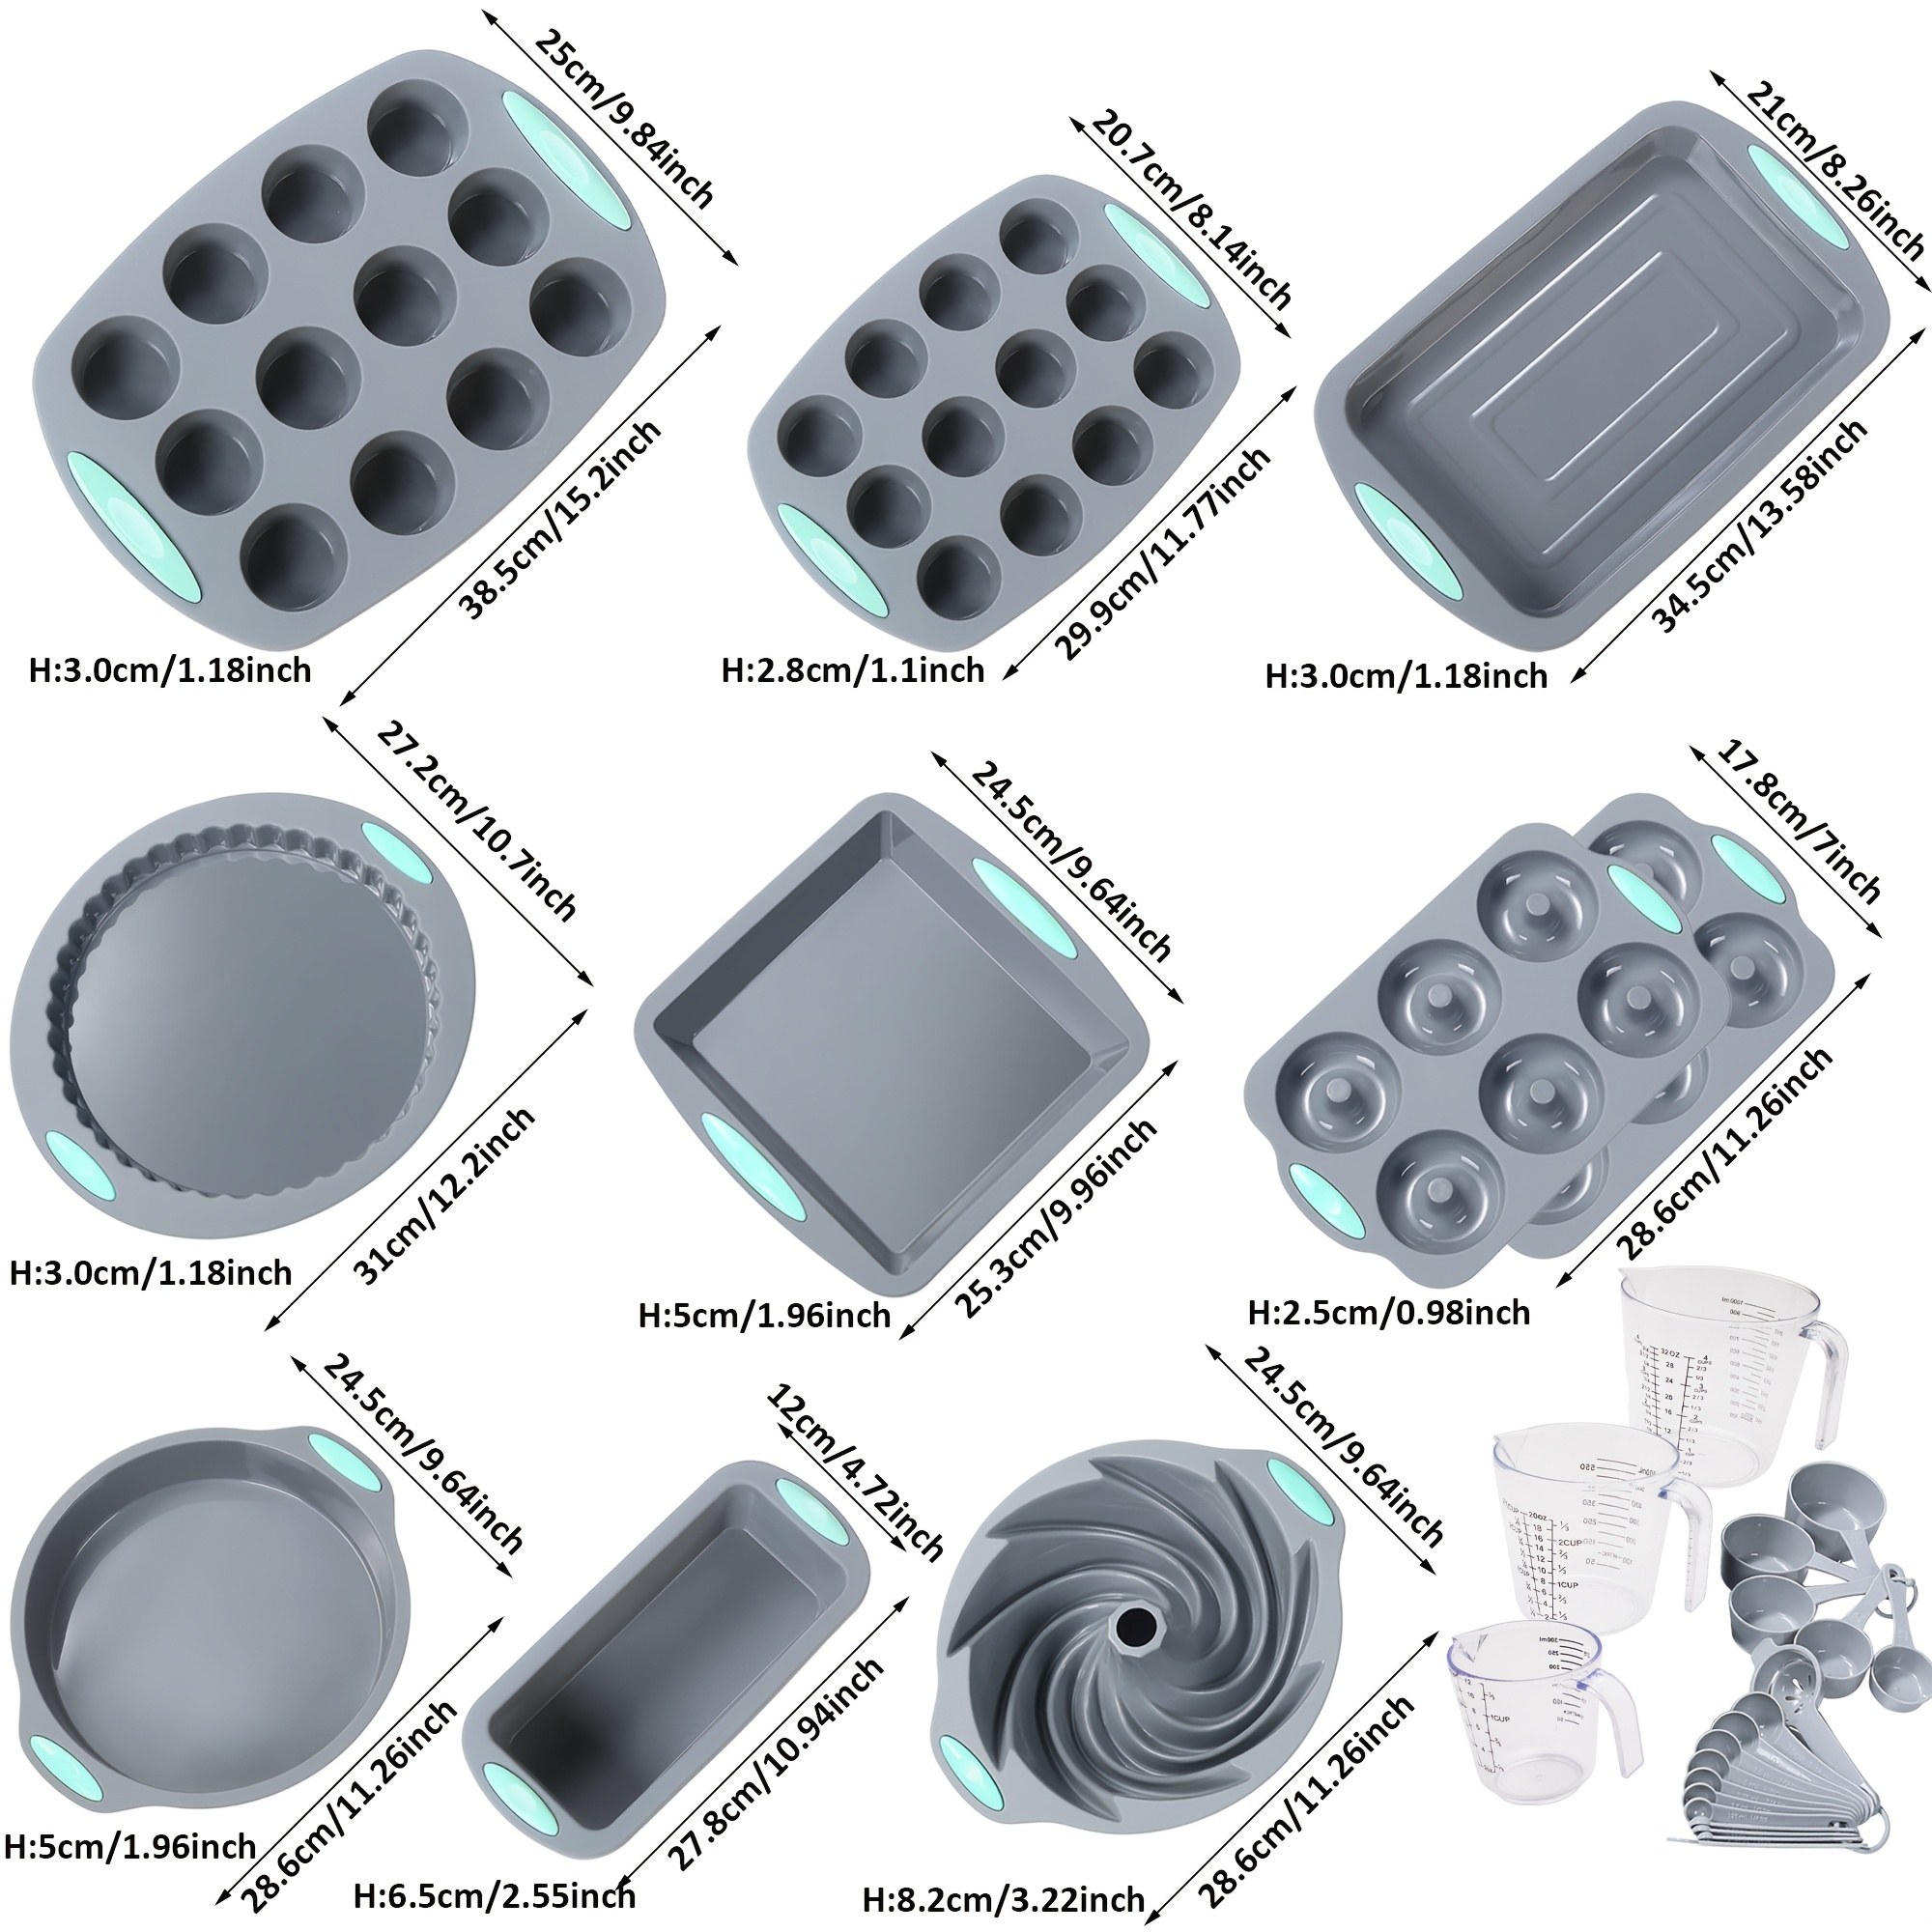 41pcs Silicone Baking Pan, Silicone Cake Molds, Baking Sheet, Donut Pan,  Silicone Muffin Pan With 36 Pack Silicone Baking Cups, Dishwasher Safe